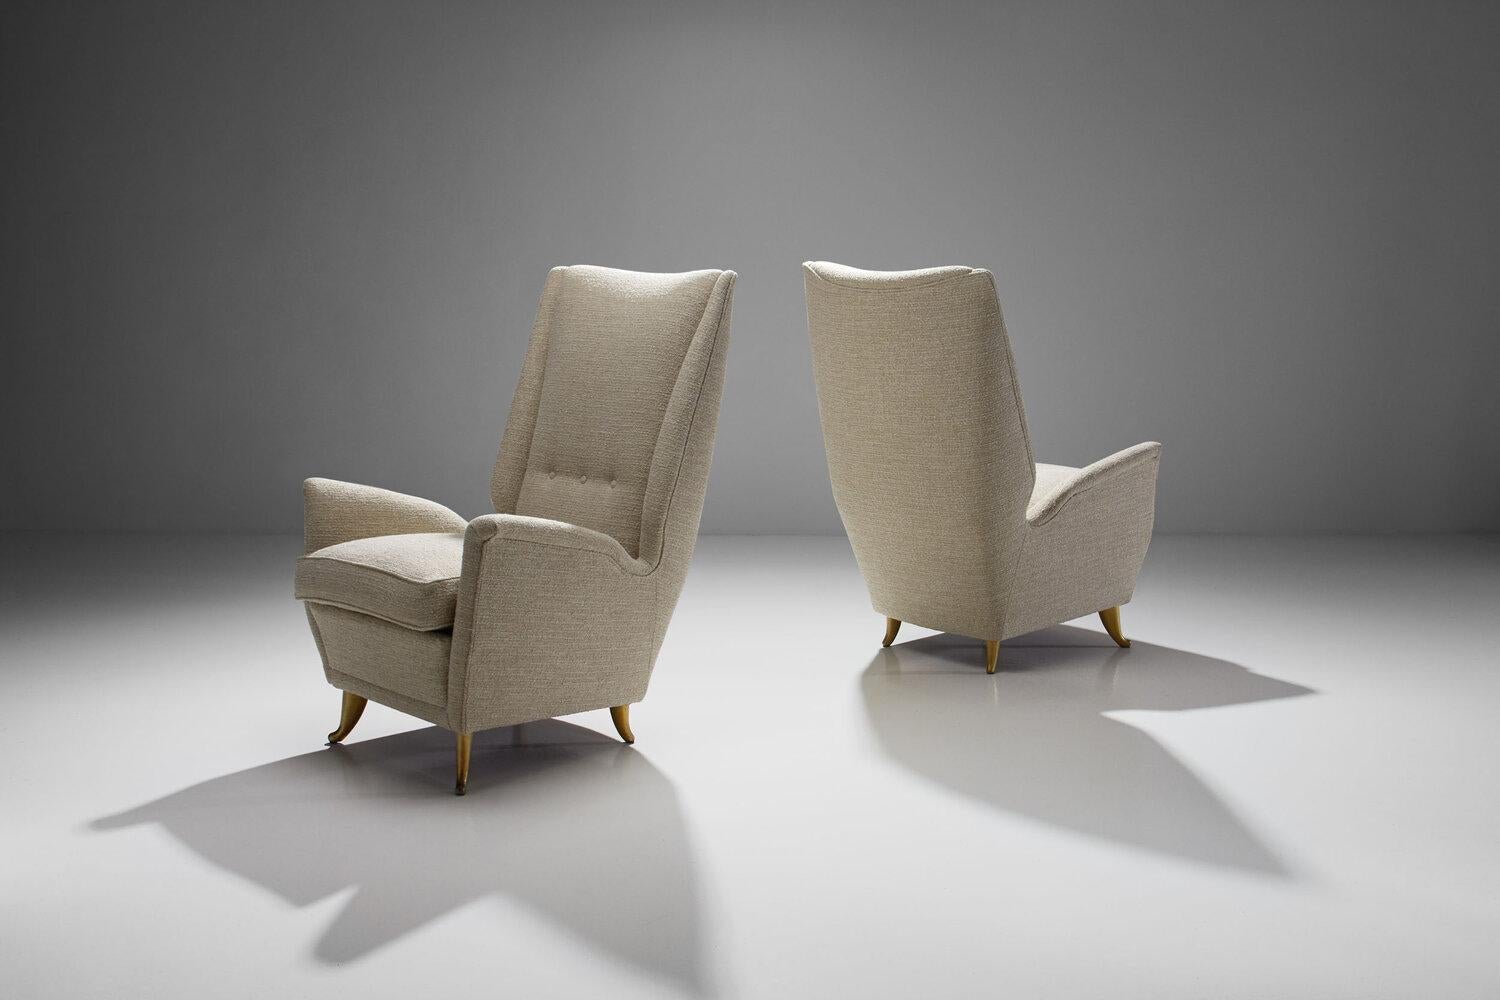 Pair of lounge chairs attributed to Gio Ponti for ISA Bergamo, Italy, 1950s

A pair of elegant high back chairs gracefully resting on four brass-colored metal curved feet. The strong lines and proportions of the chairs are perfectly balanced with